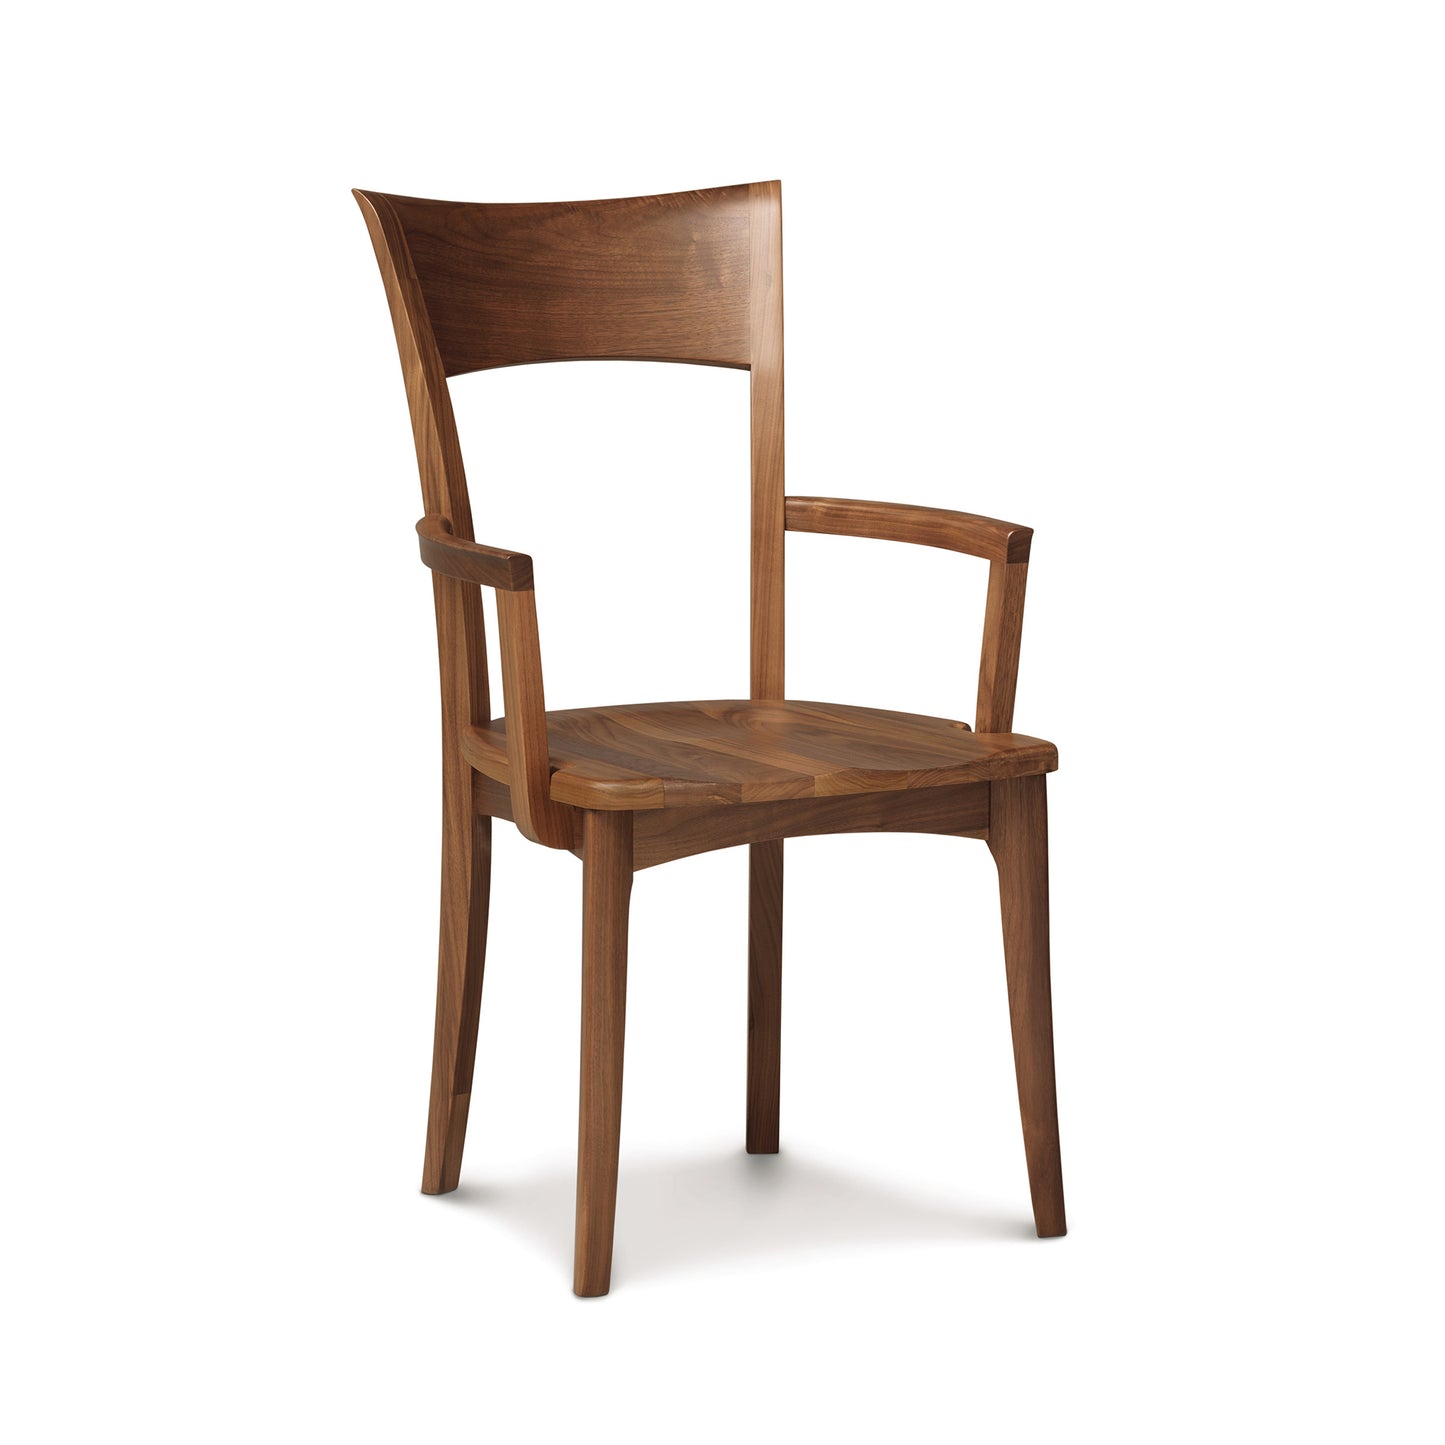 A wooden dining chair with arms on a white background.